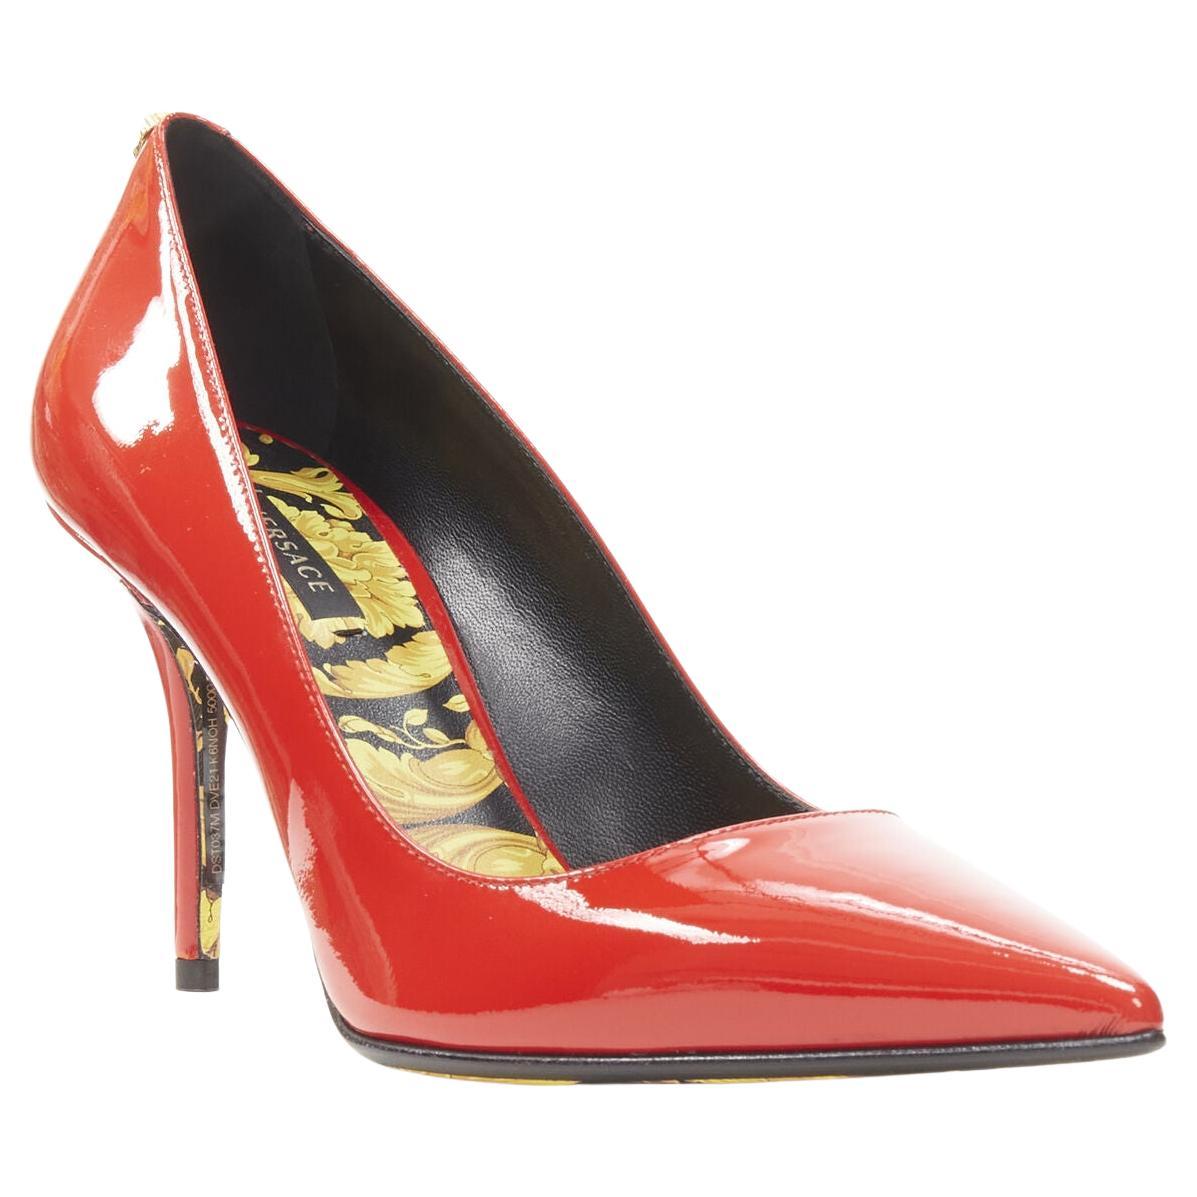 new VERSACE Hibiscus Barocco Eros red patent floral sole Medusa pump US7 EU37 For Sale